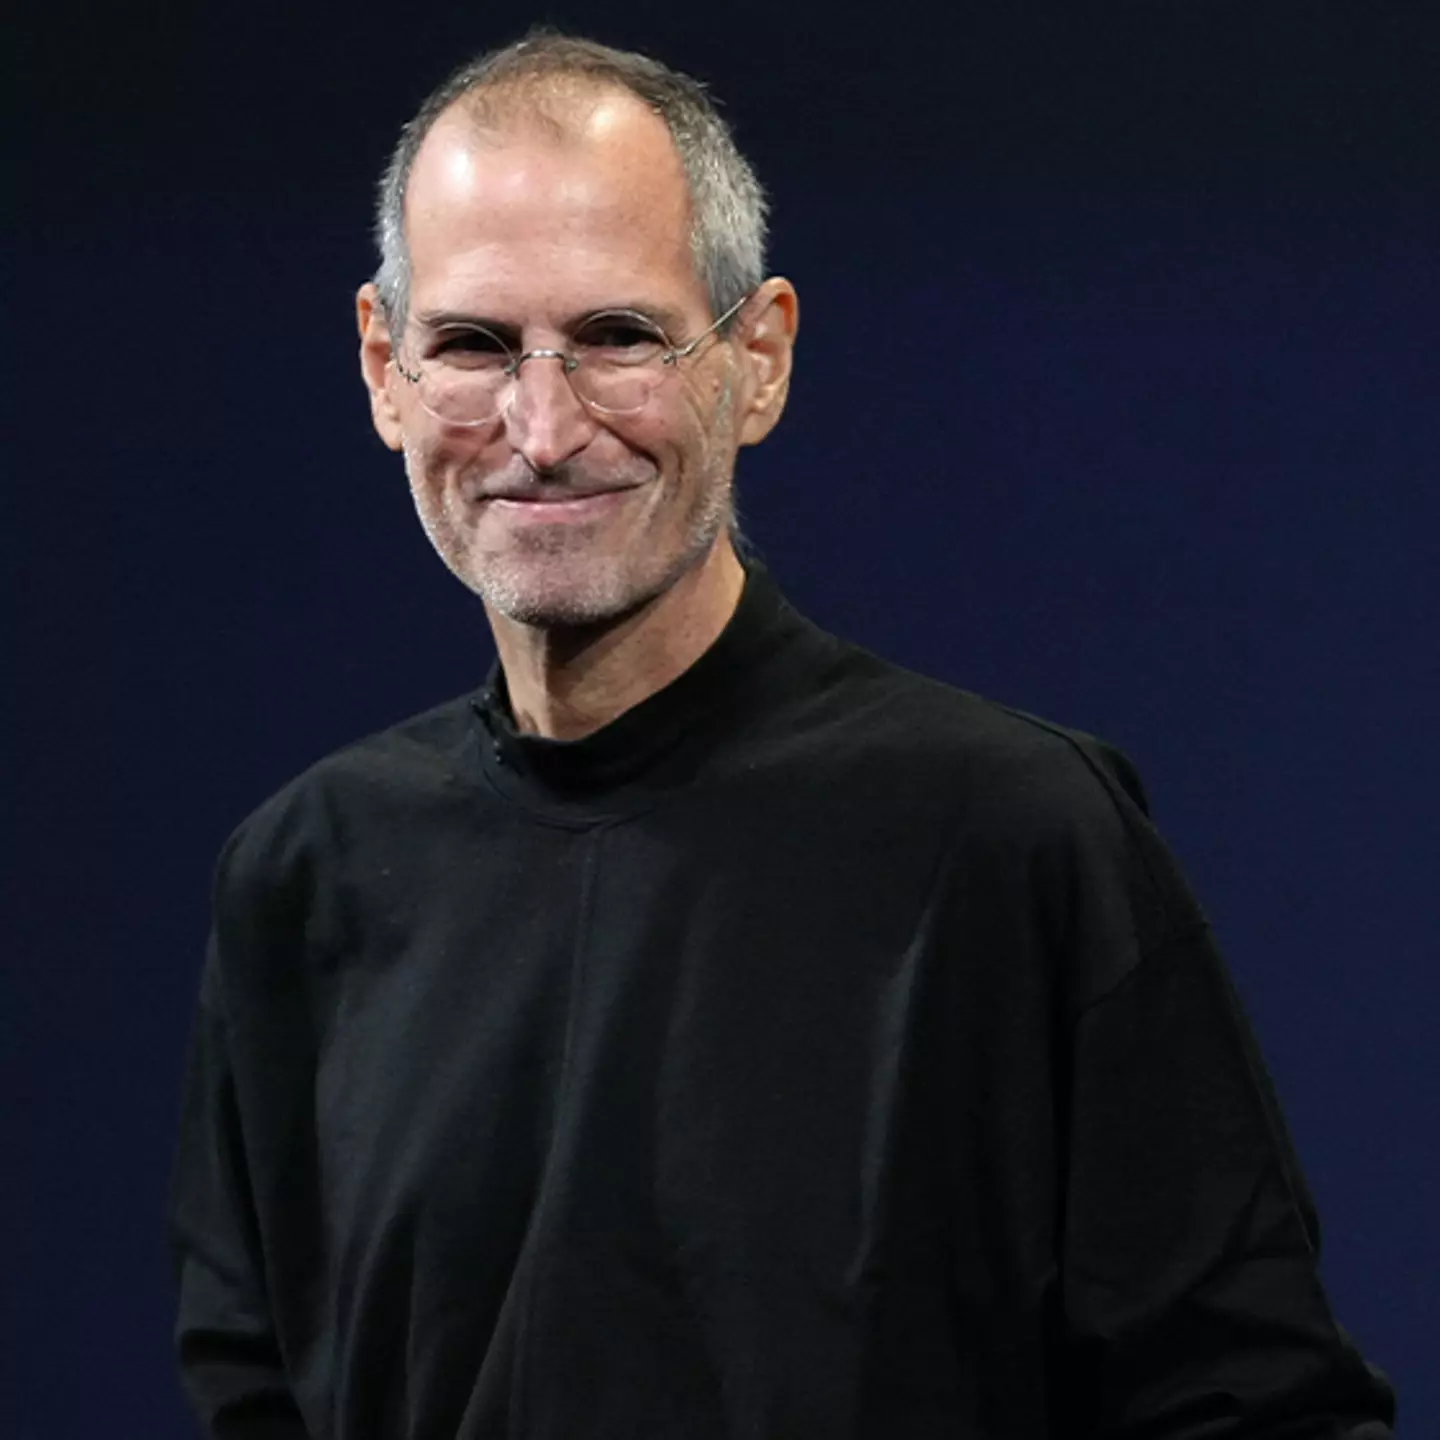 Steve Jobs' typed letter to fan who requested an autograph ended up selling for insane amount of money